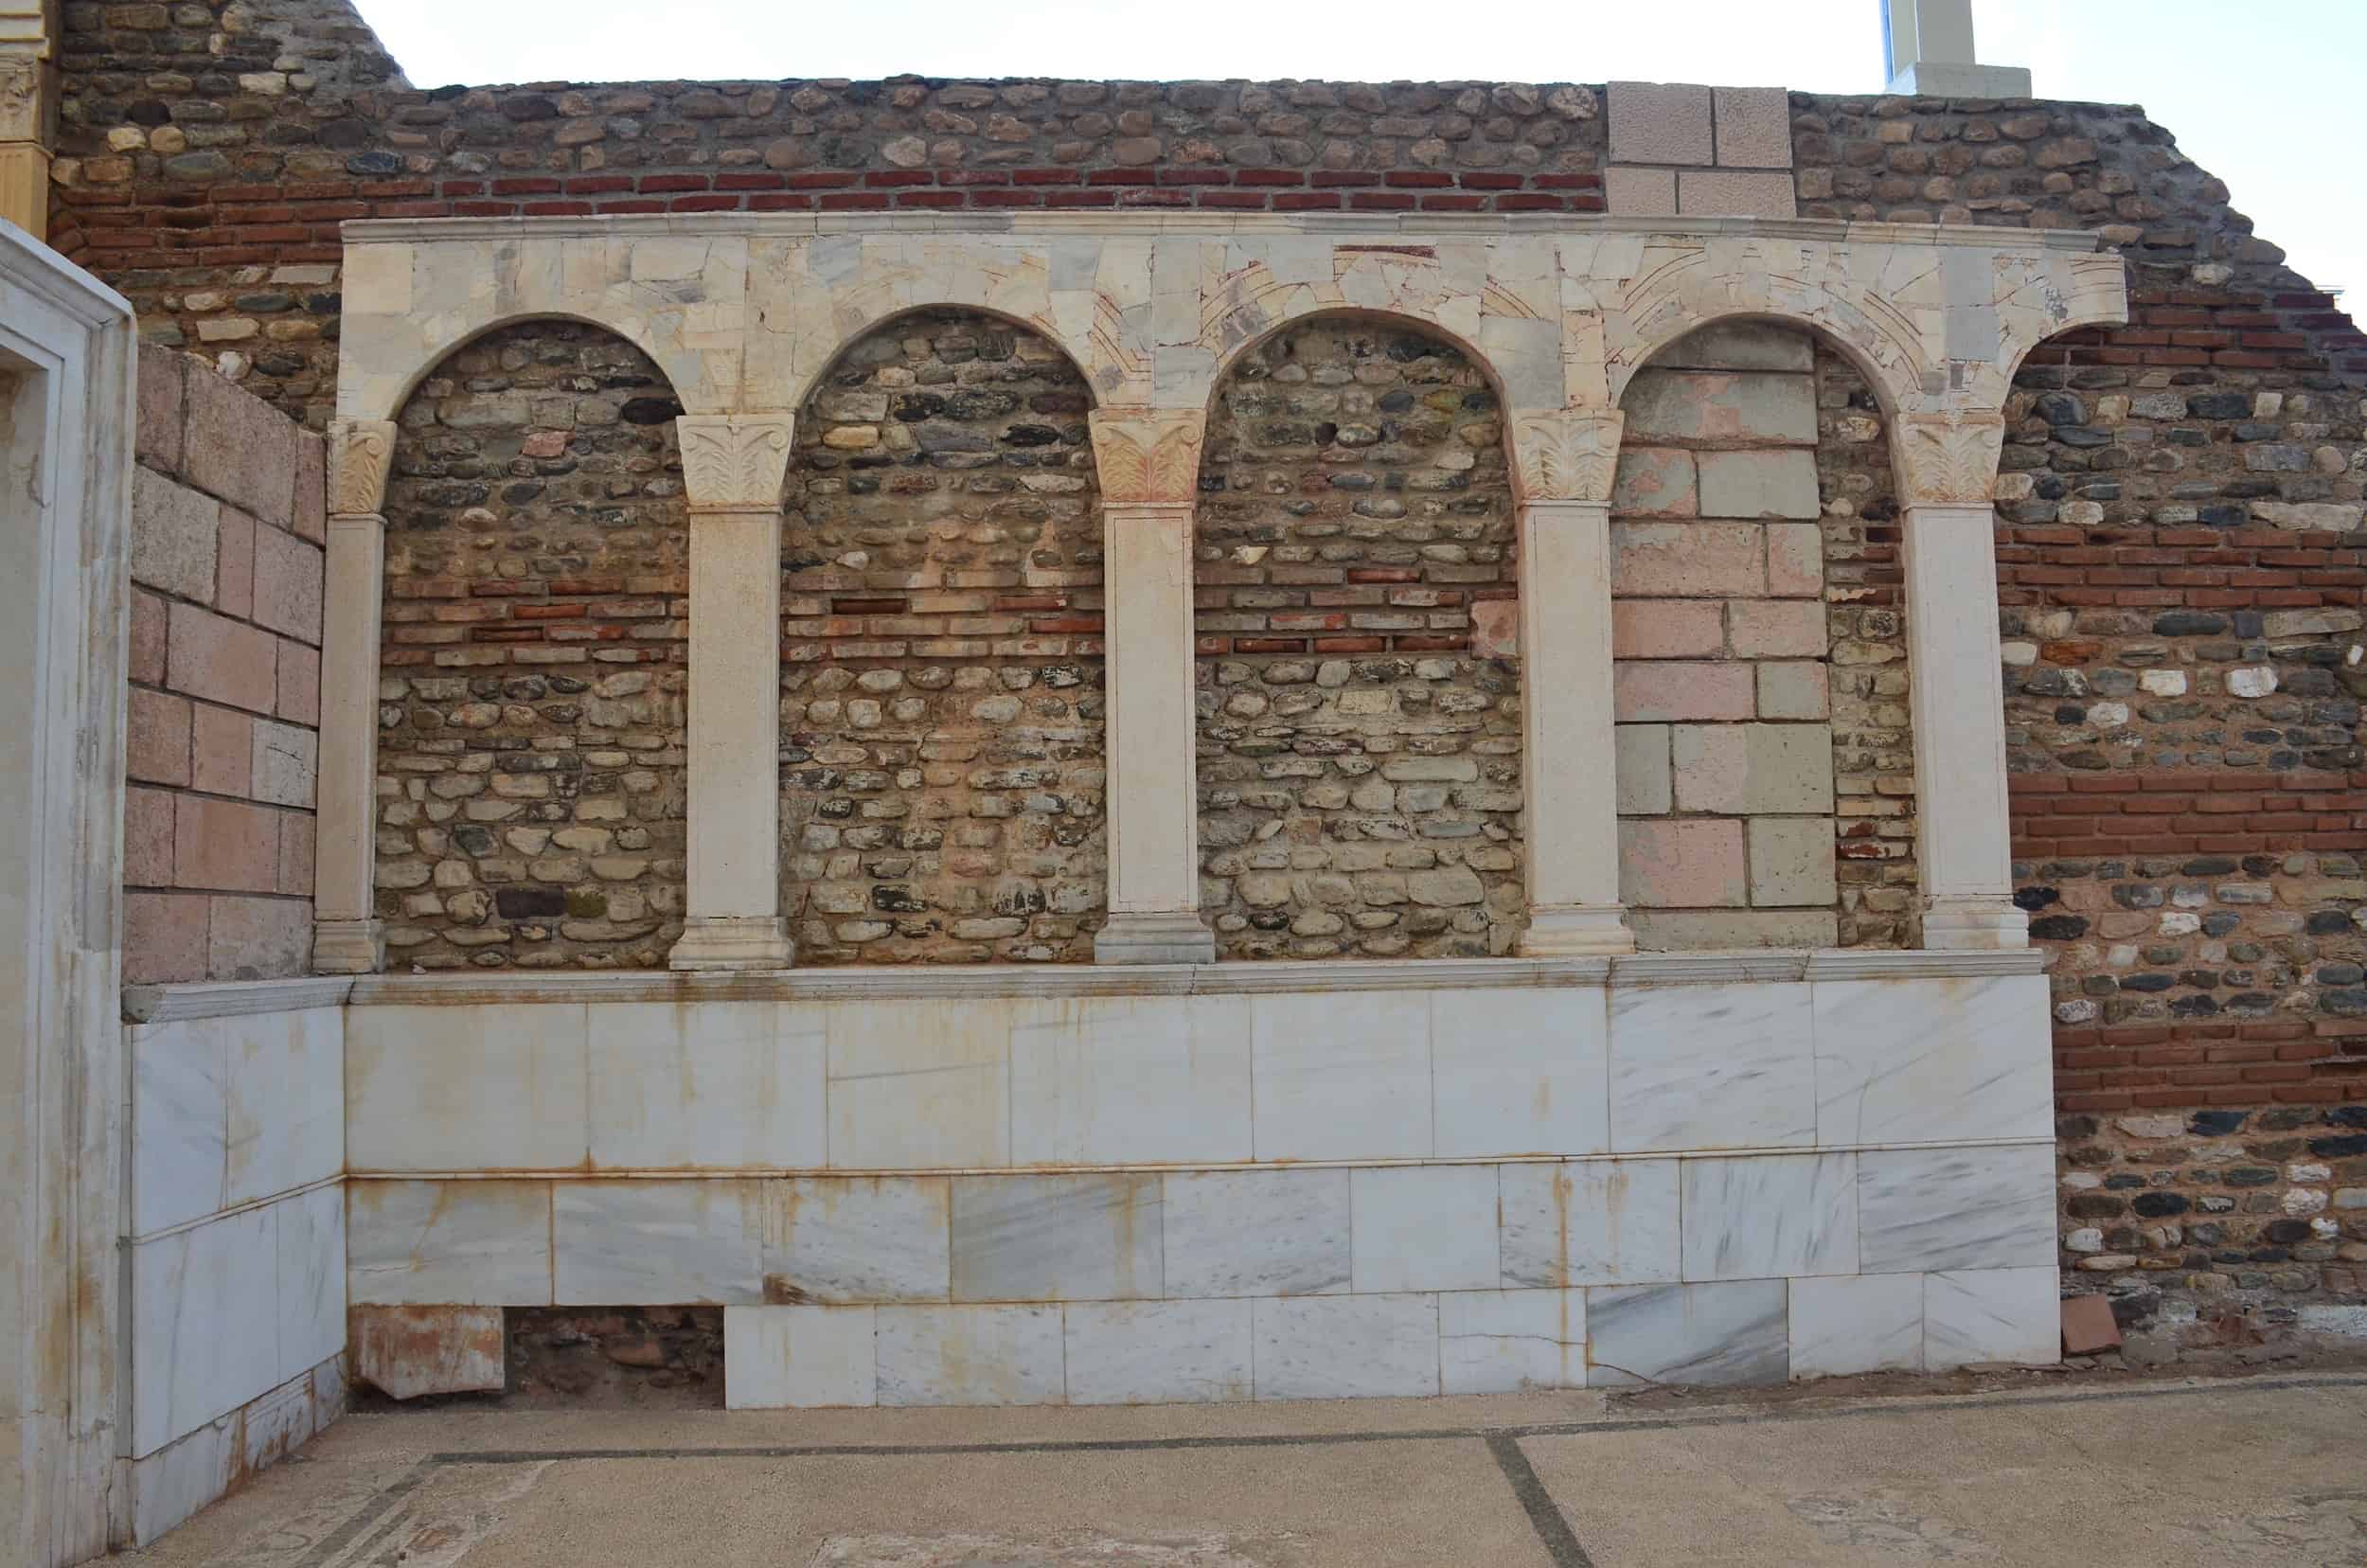 Wall decorations in the forecourt of the Sardis Synagogue